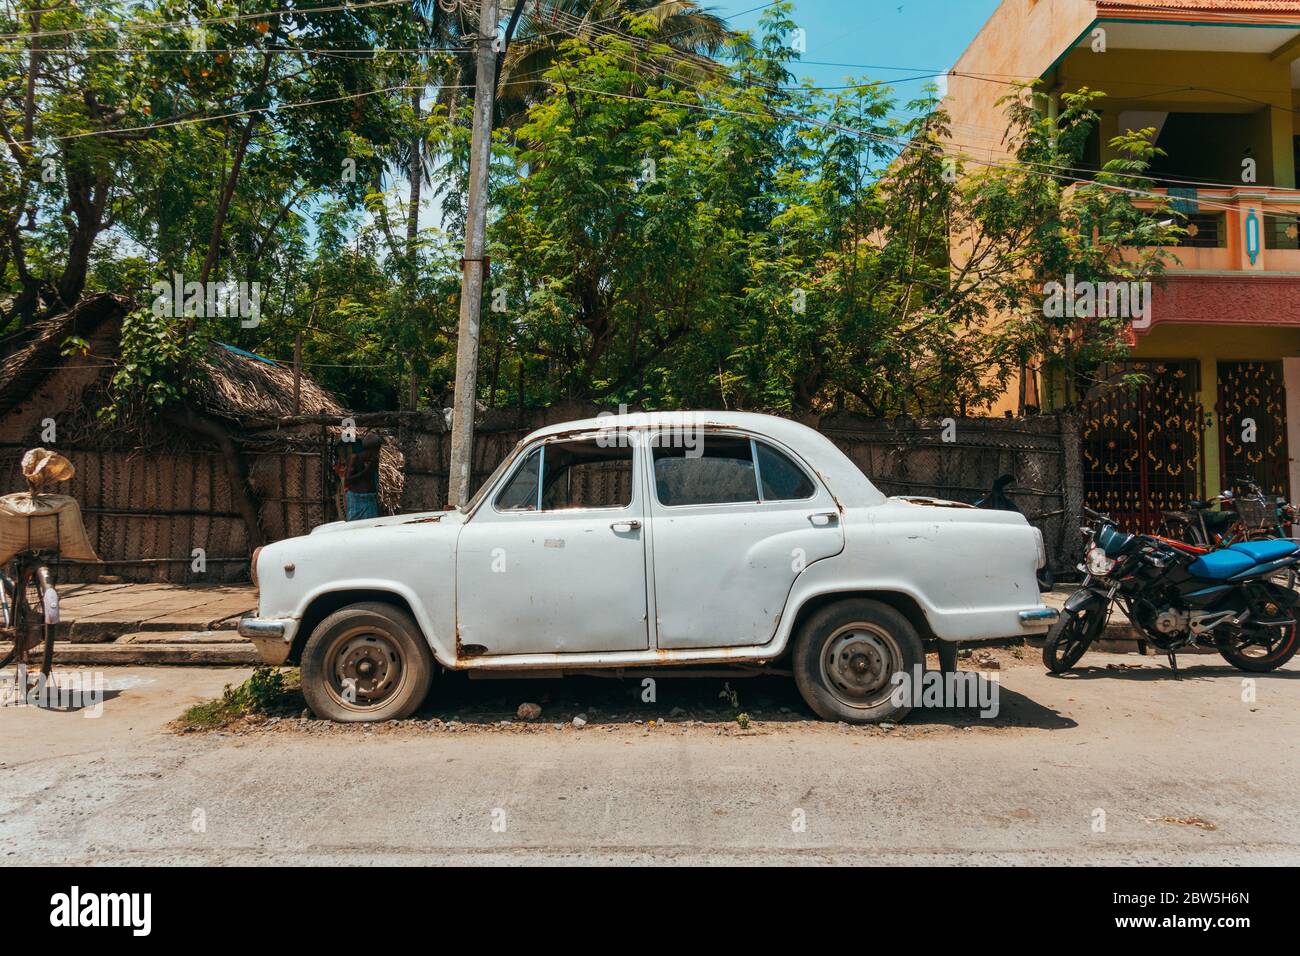 A run-down old Hindustan Ambassador car parked on a street in Pondicherry, India Stock Photo